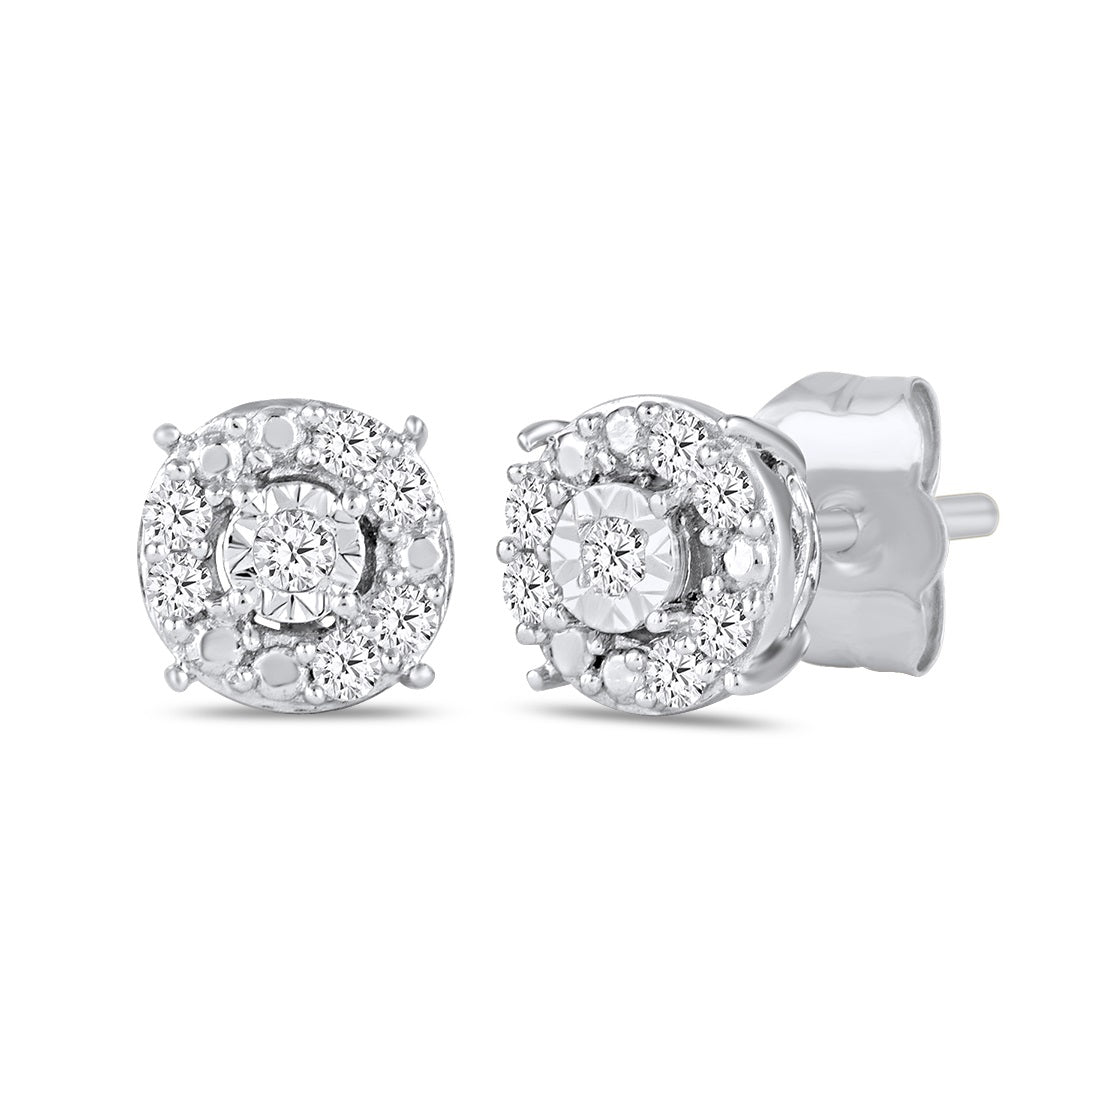 Tia Brilliant Miracle Stud Earrings with 0.10ct of Diamonds in 9ct White Gold Earrings Bevilles 